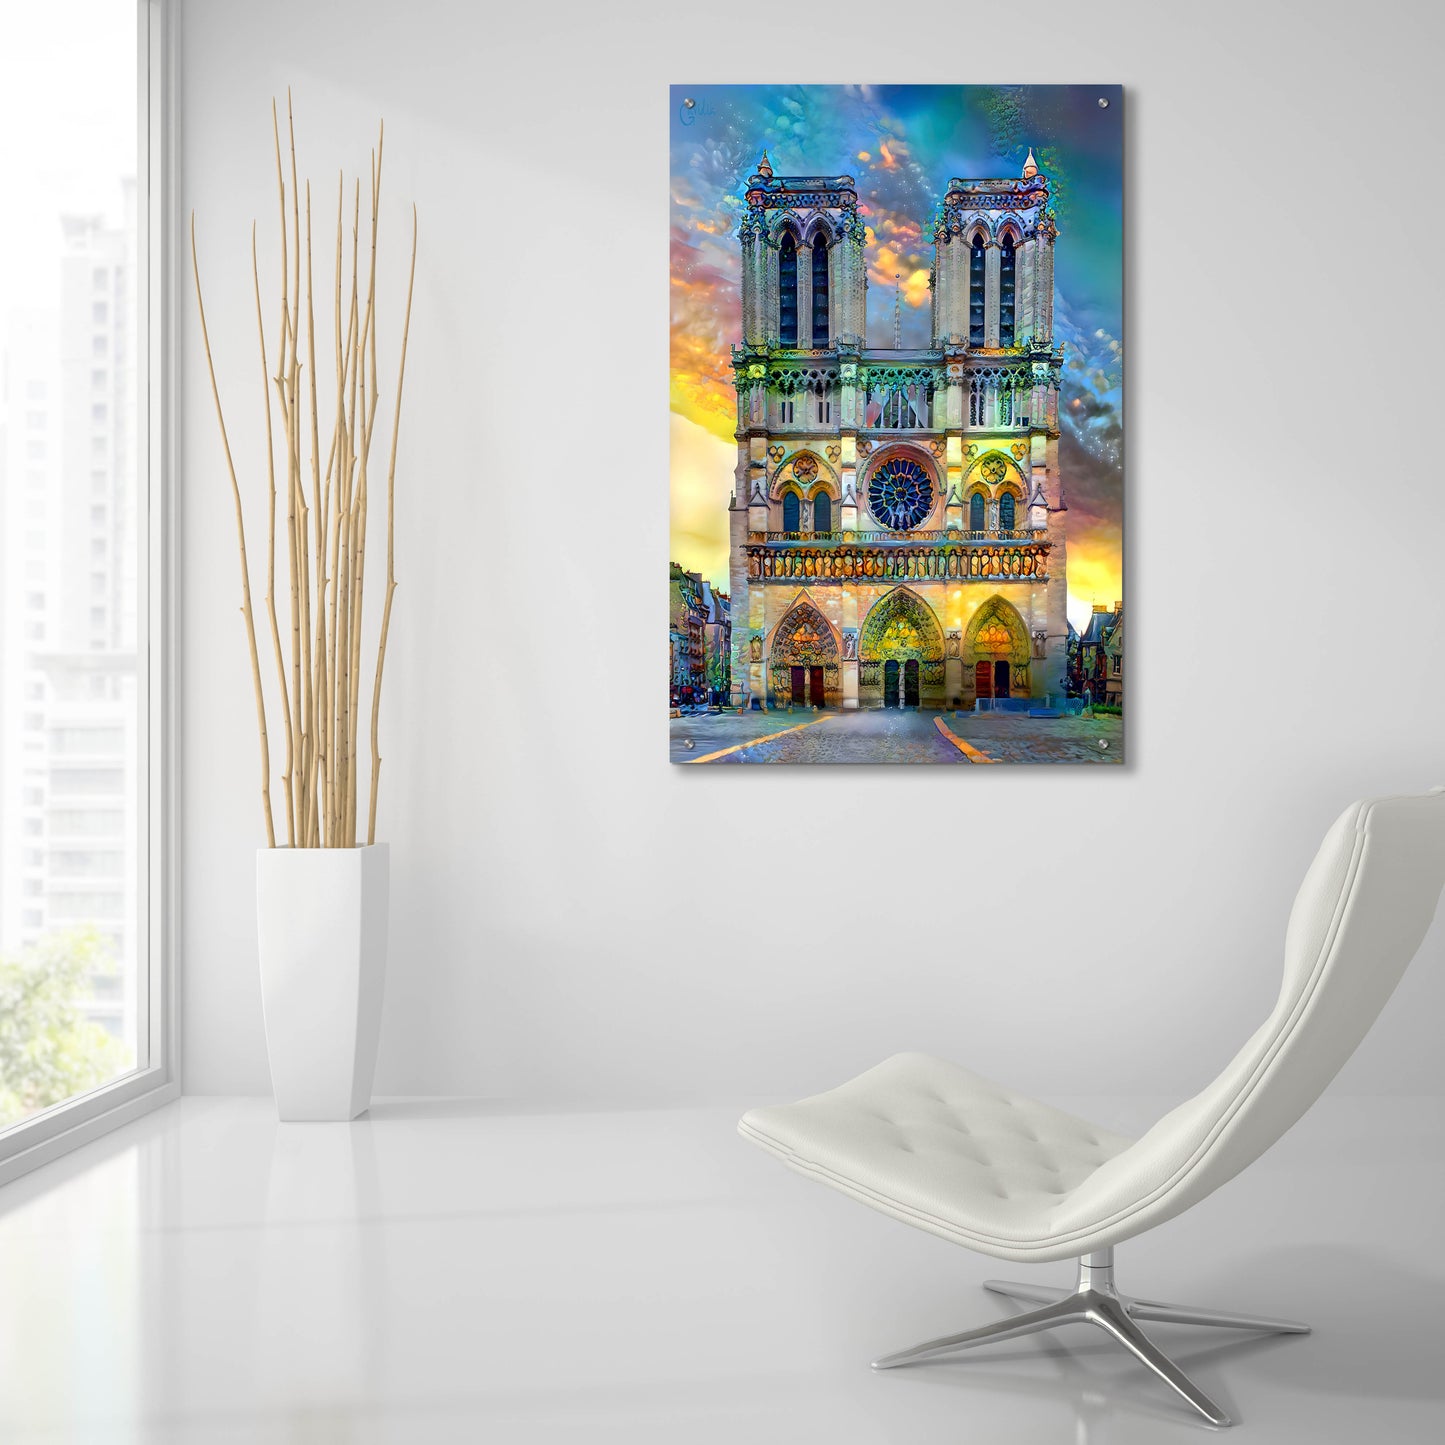 Epic Art 'Paris France Notre Dame Cathedral' by Pedro Gavidia, Acrylic Glass Wall Art,24x36